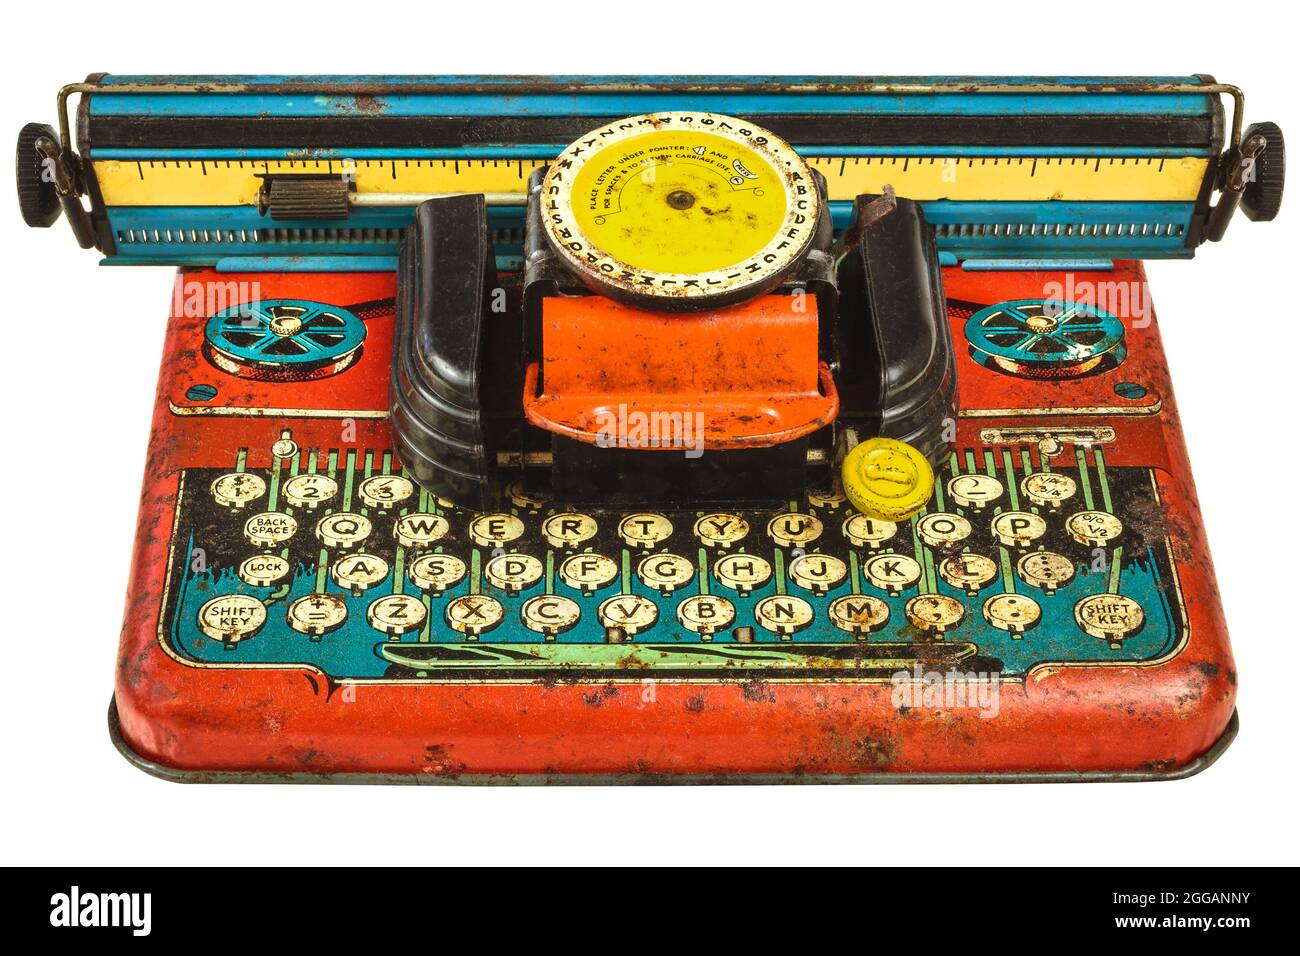 Colorful vintage toy typewriter isolated on a white background Stock Photo